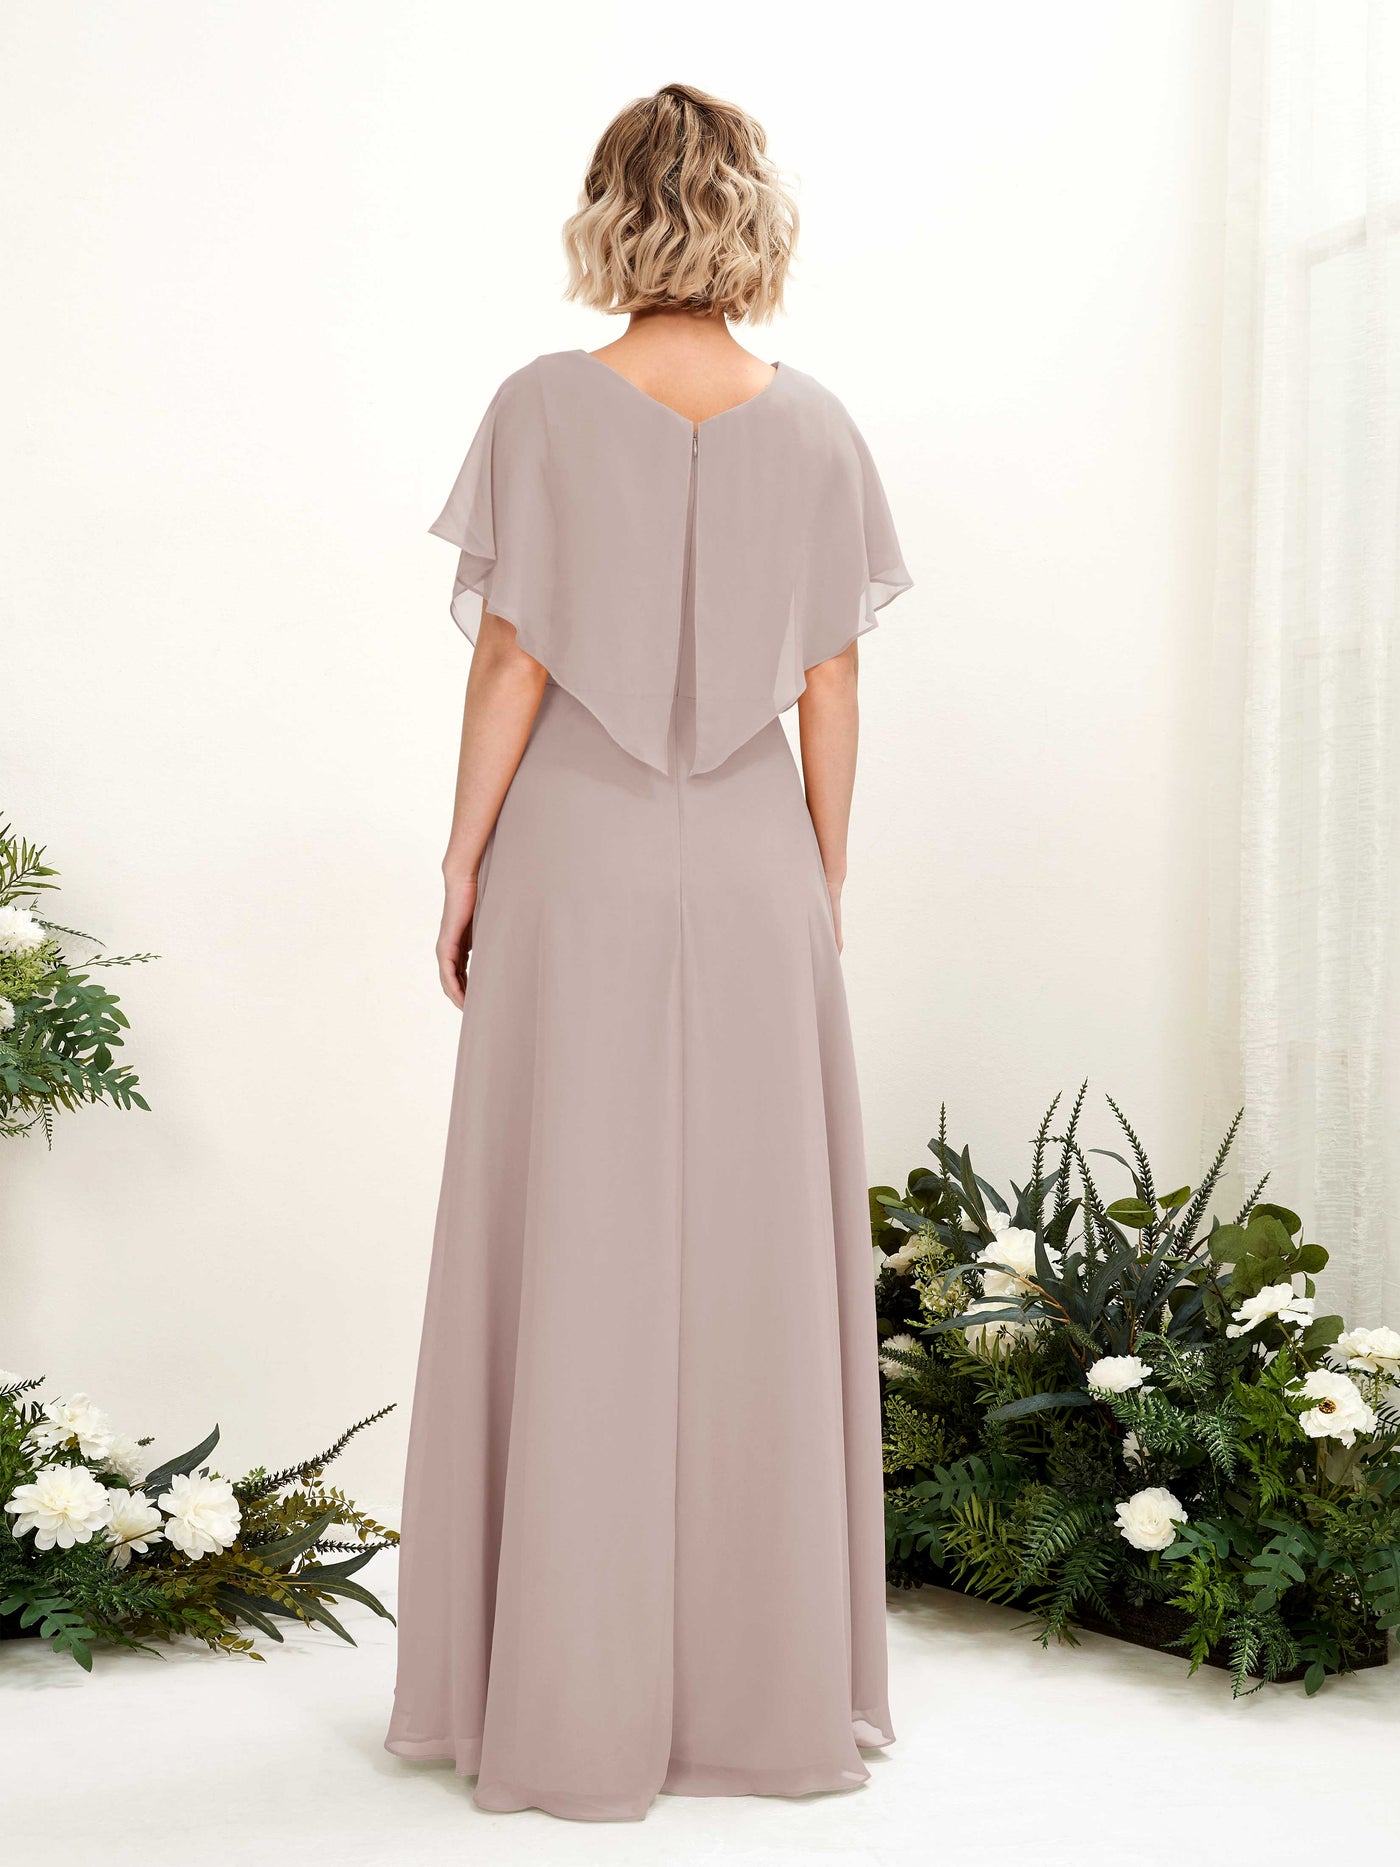 Taupe Bridesmaid Dresses Bridesmaid Dress A-line Chiffon V-neck Full Length Short Sleeves Wedding Party Dress (81222124)#color_taupe